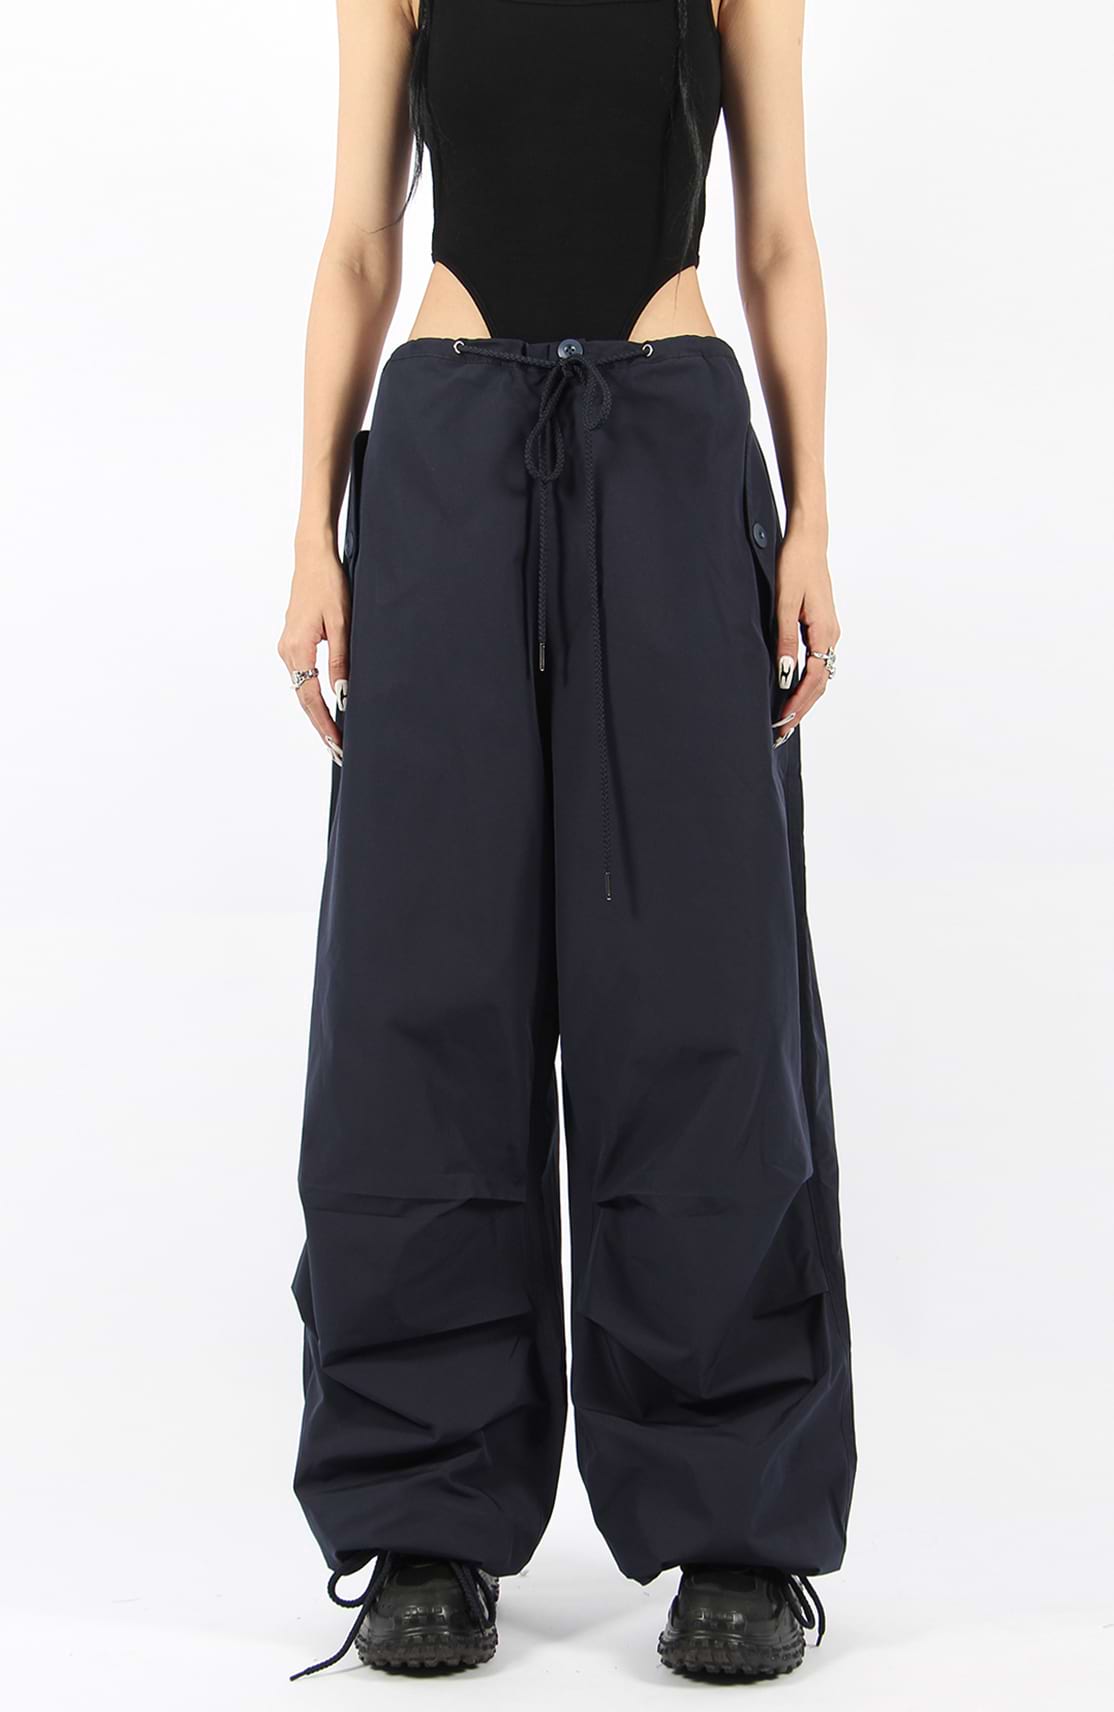 Ruched Drawstring Lightweight Pants